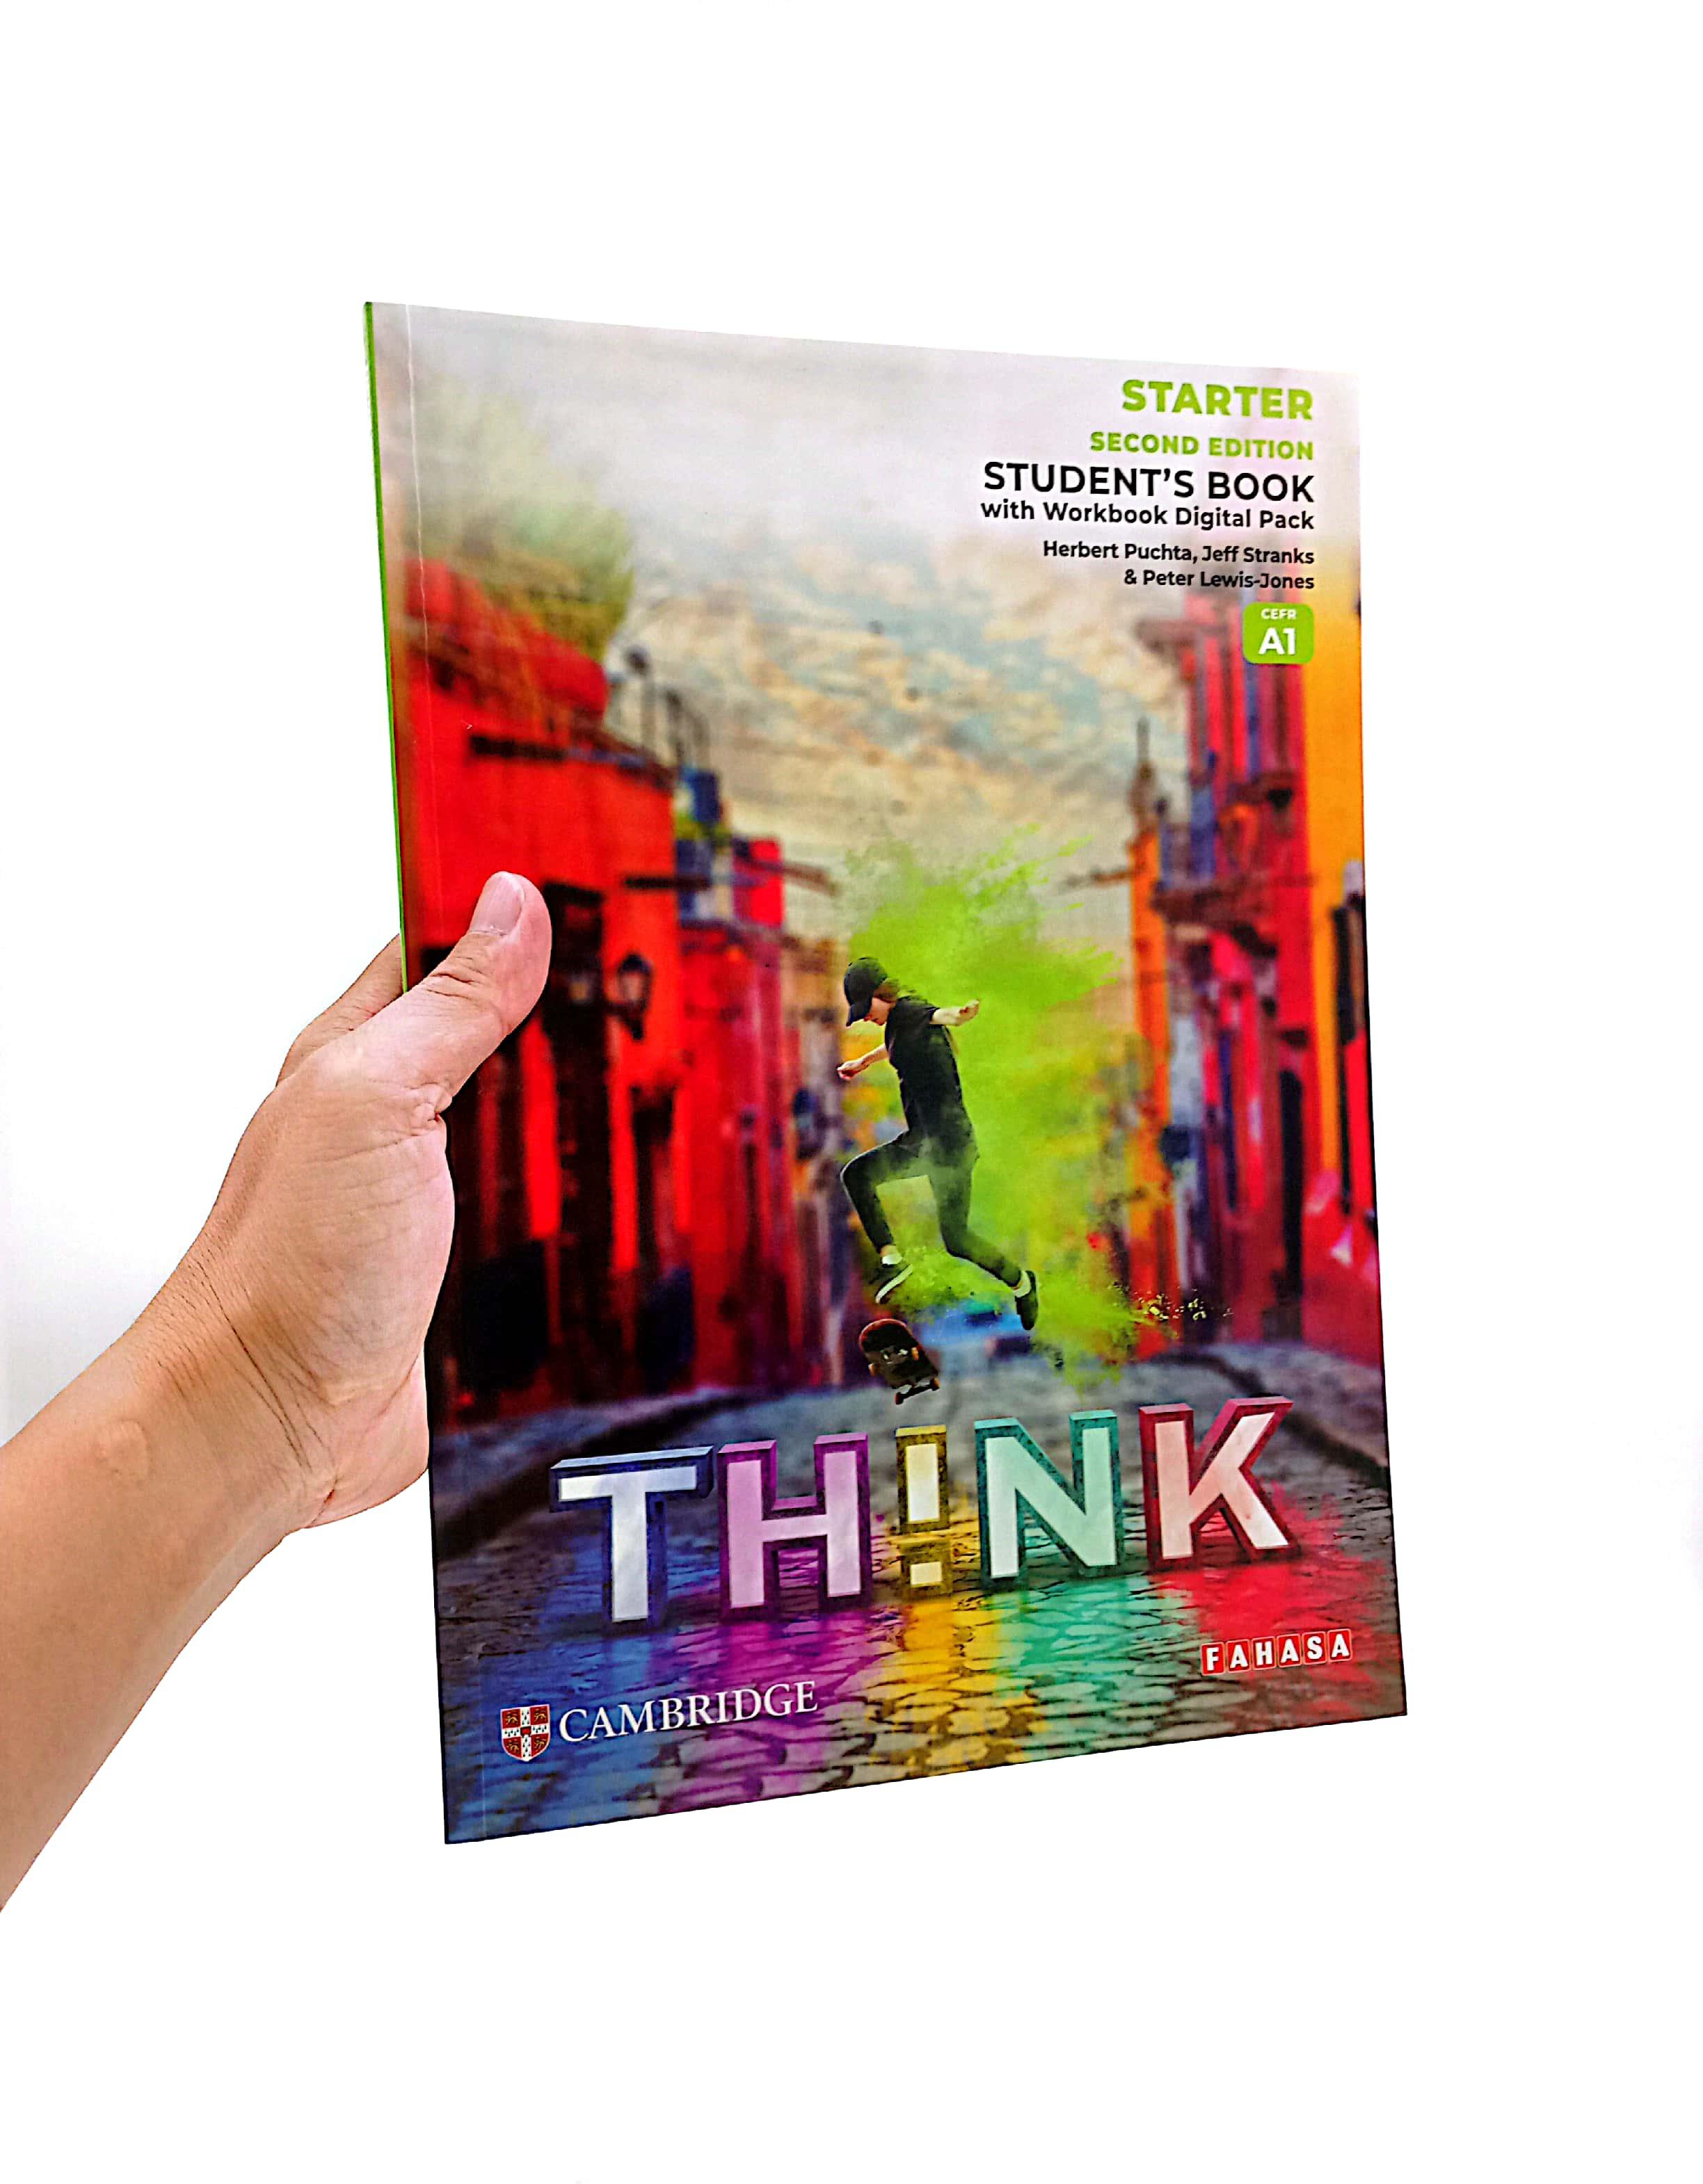 Think Level Starter Student's Book With Workbook Digital Pack British English - 2nd Edition